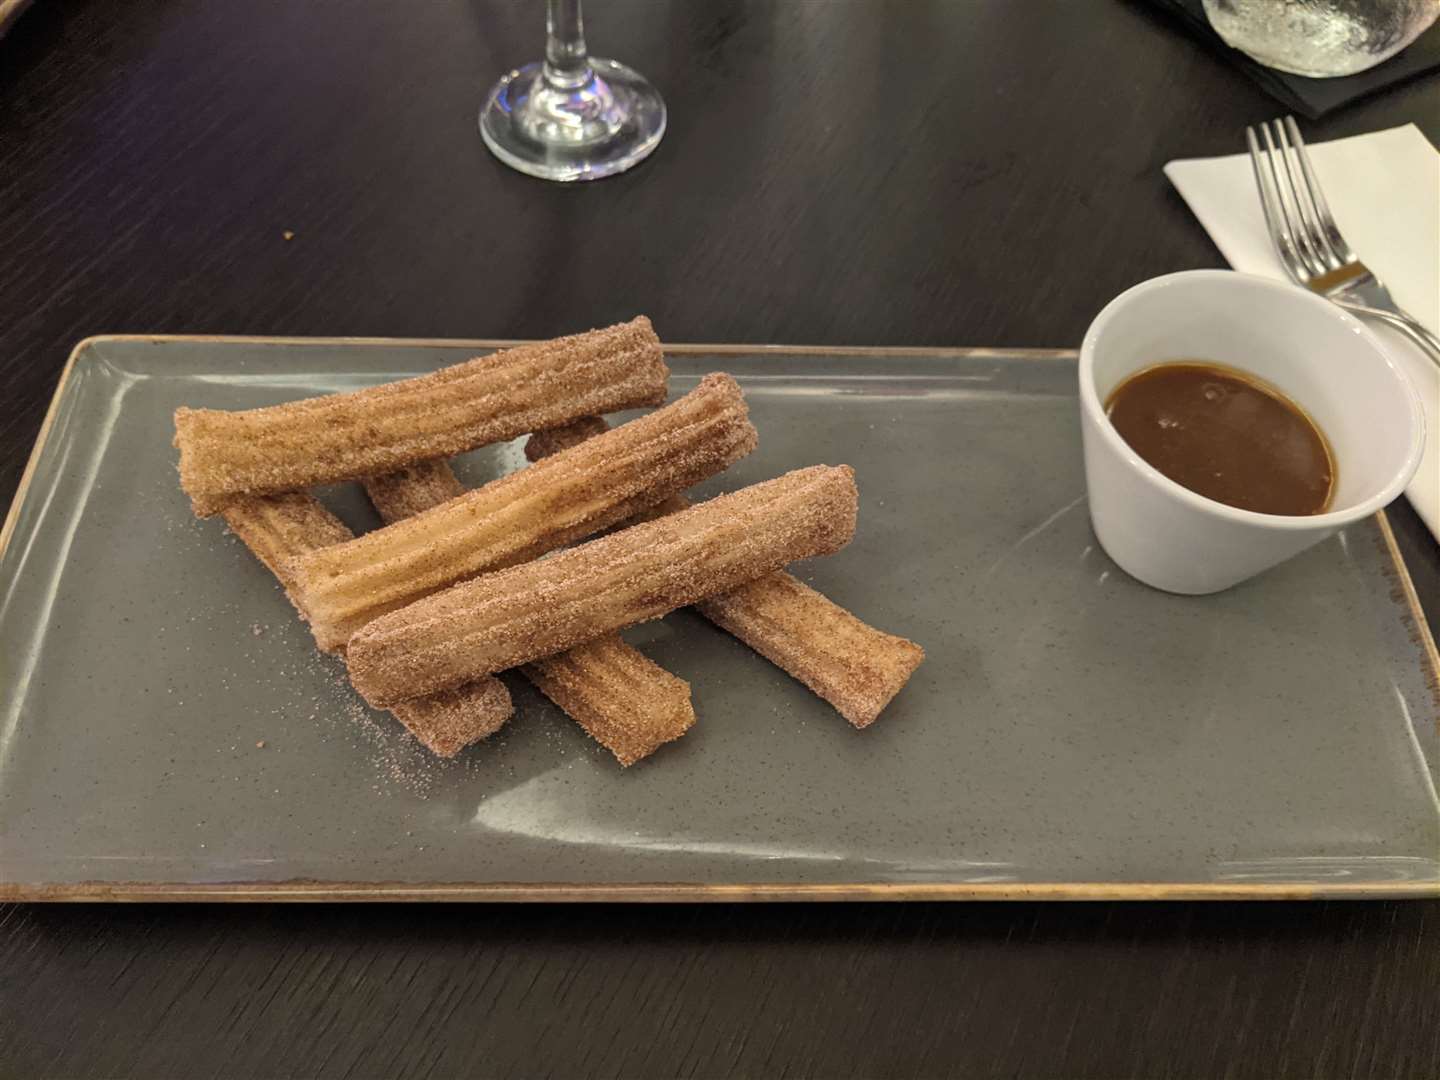 Best Churros I've ever eaten. Heating up the sauce was a nice touch